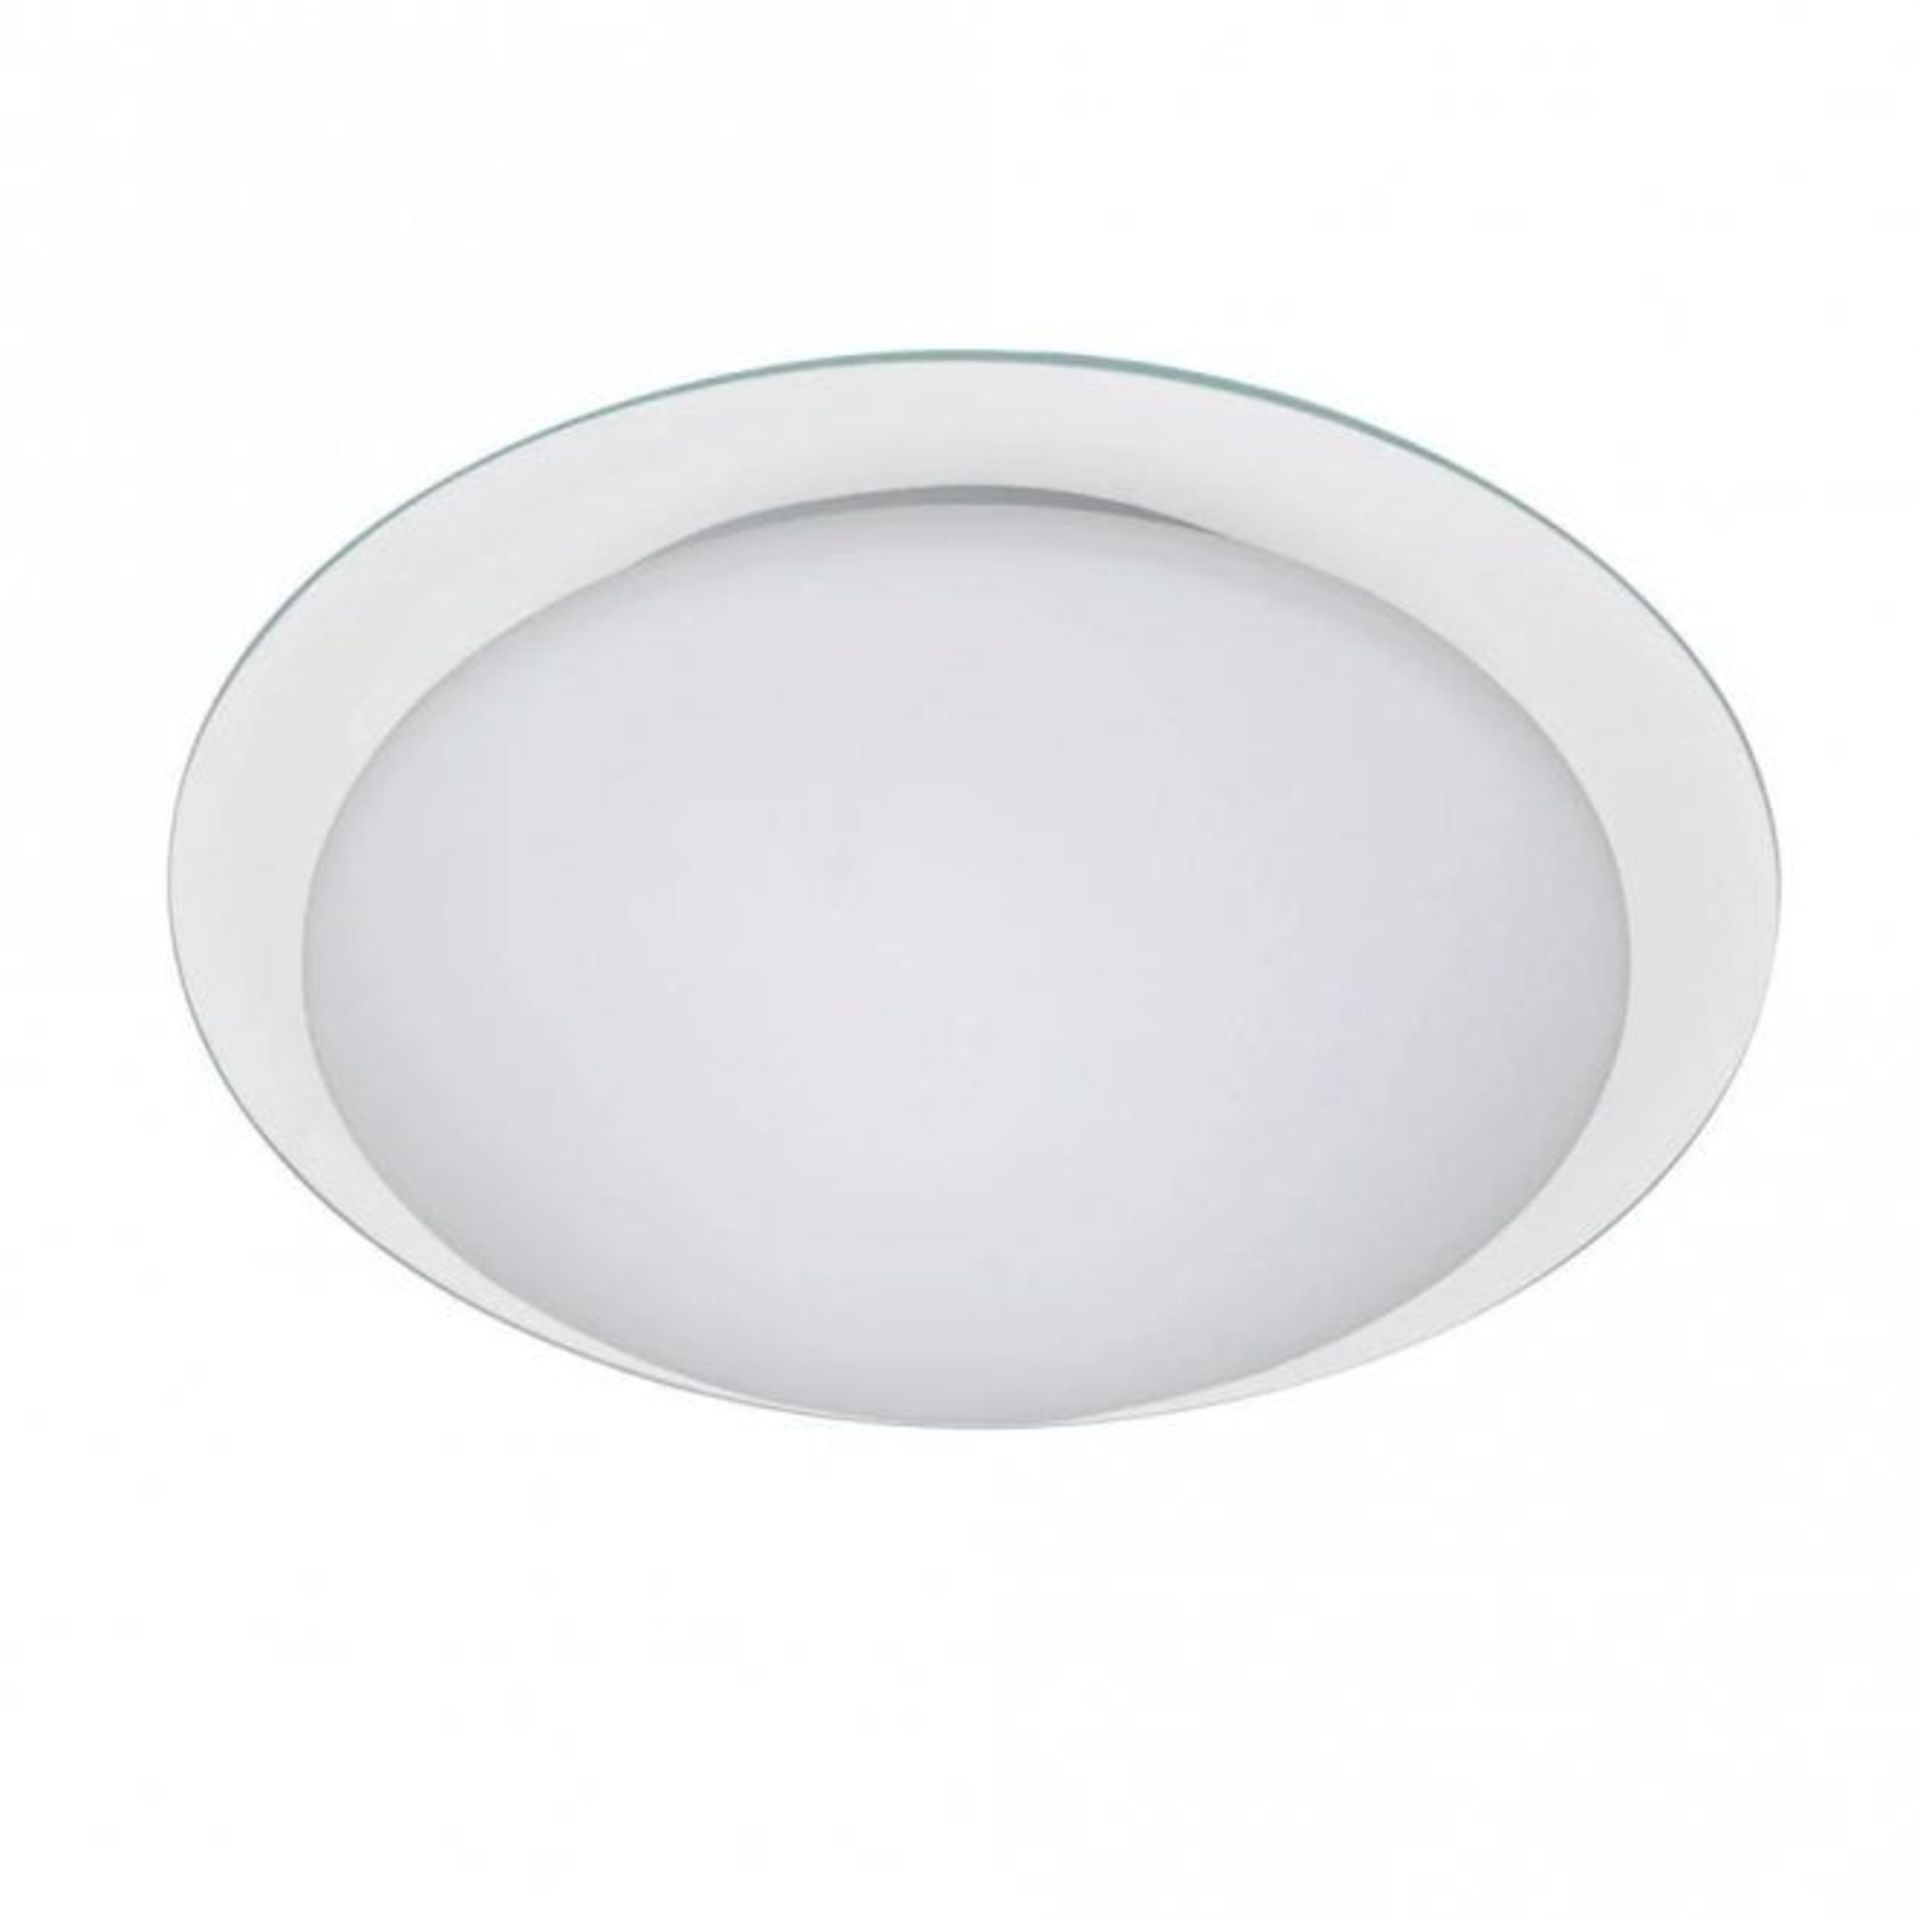 1 x Spa Bathroom Lighting - Carina Glass and Opal Round Ceiling Light - Unused Boxed Stock - CL011 -